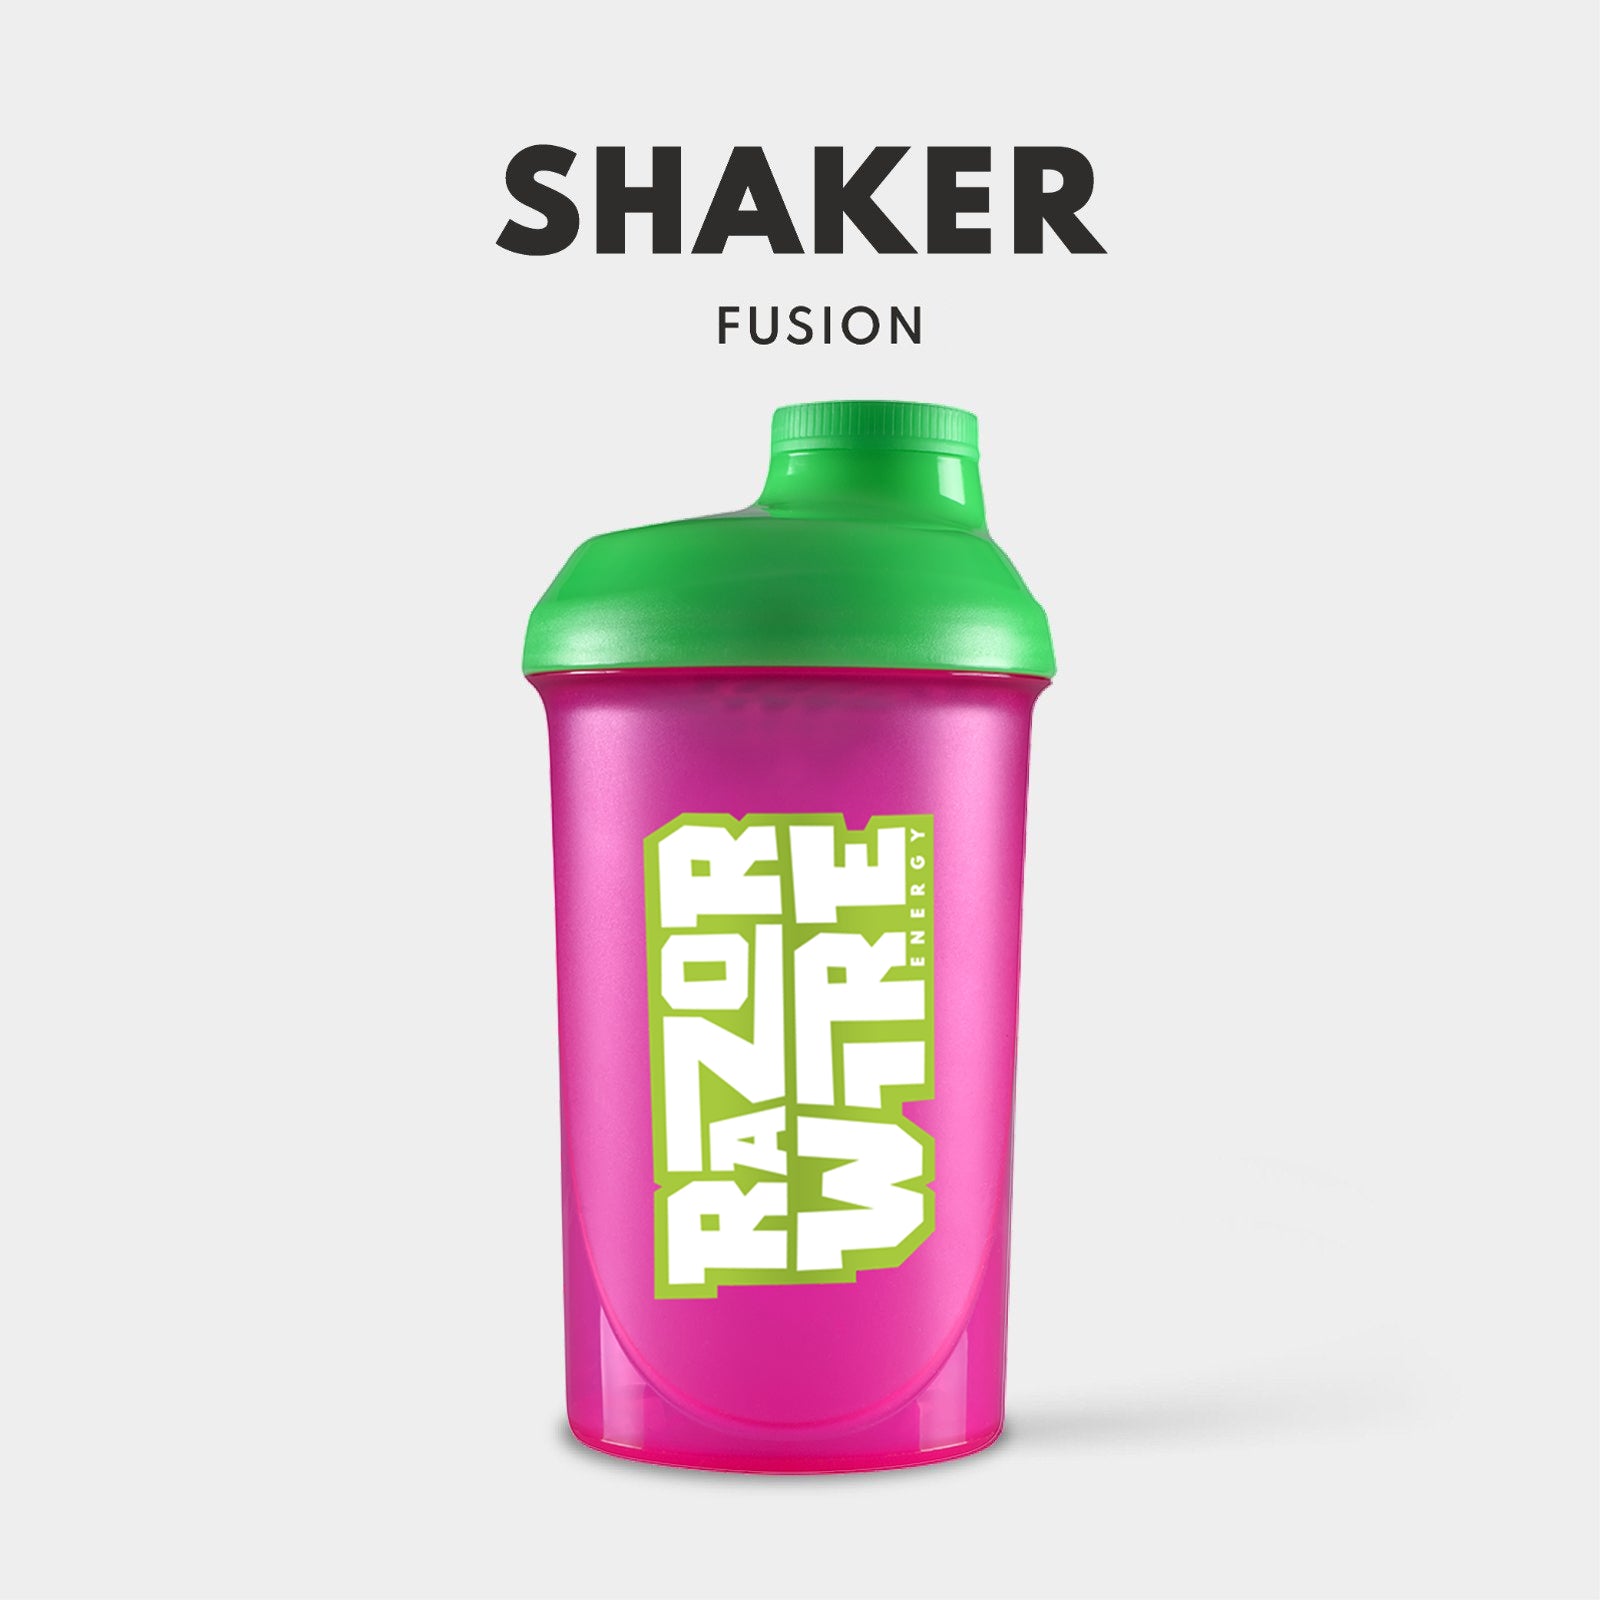 SHAKERS